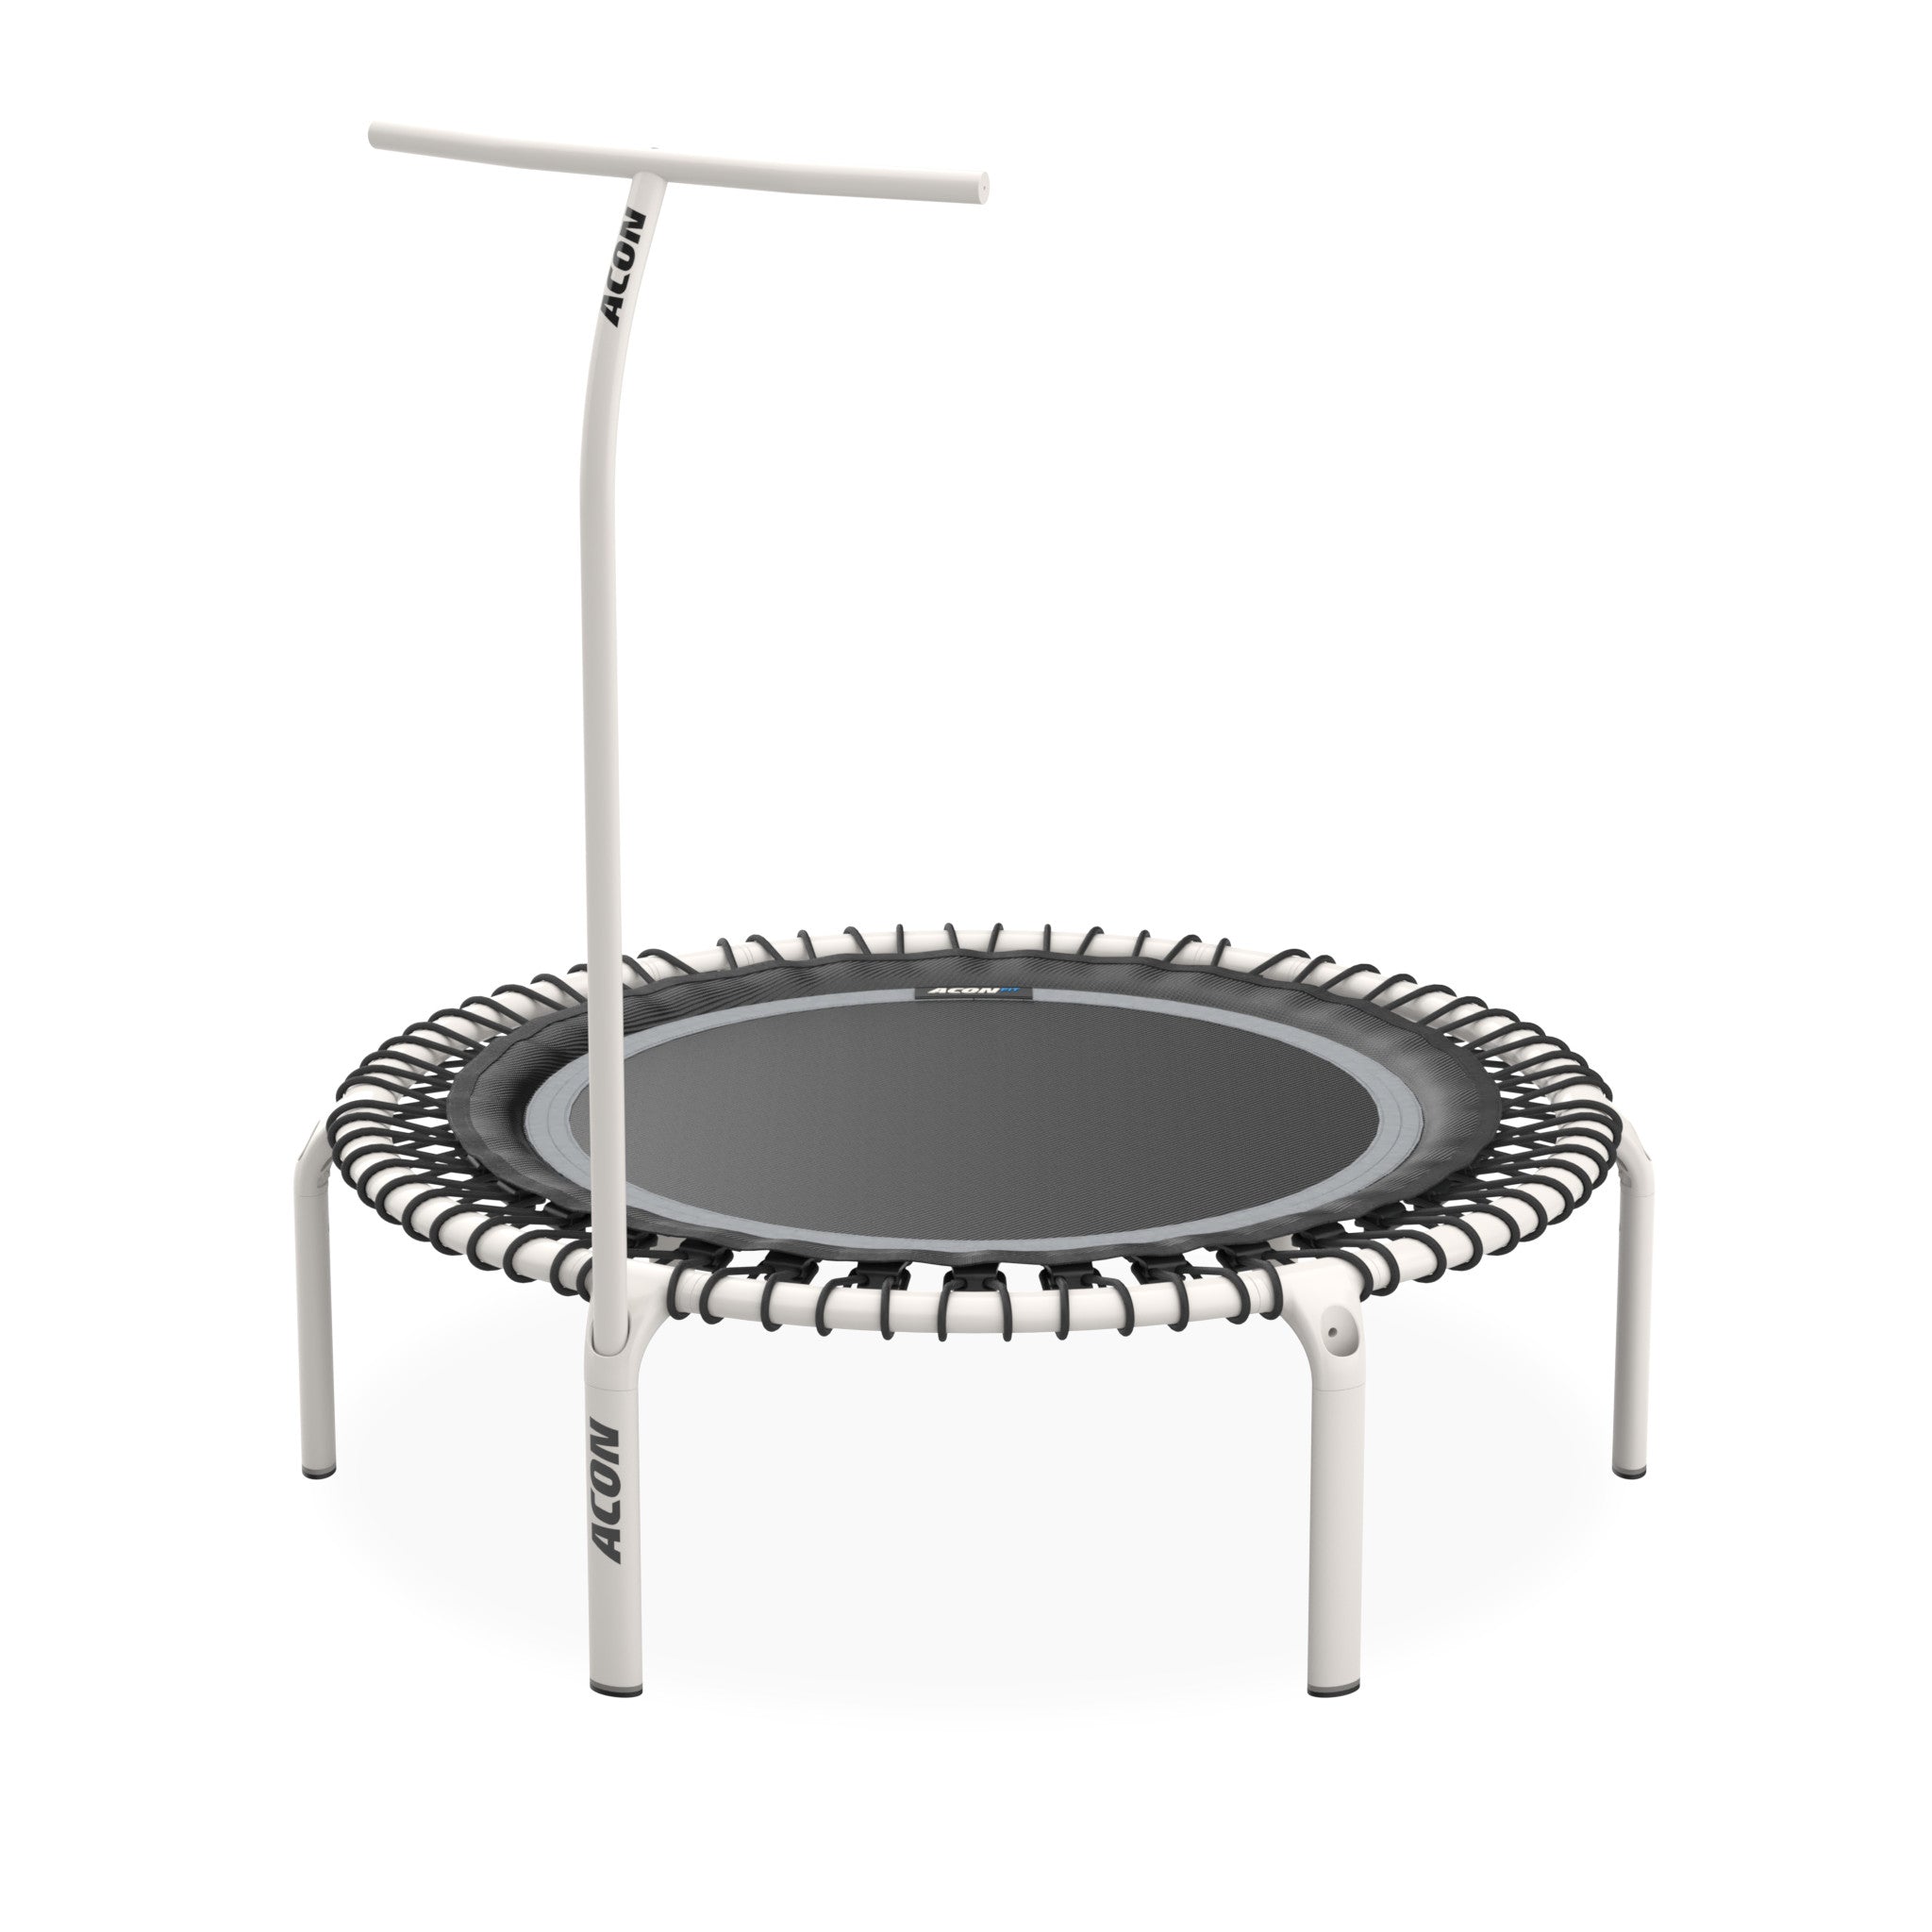 ACON FIT 1,12 m Trampoline Round with Handlebar, White.